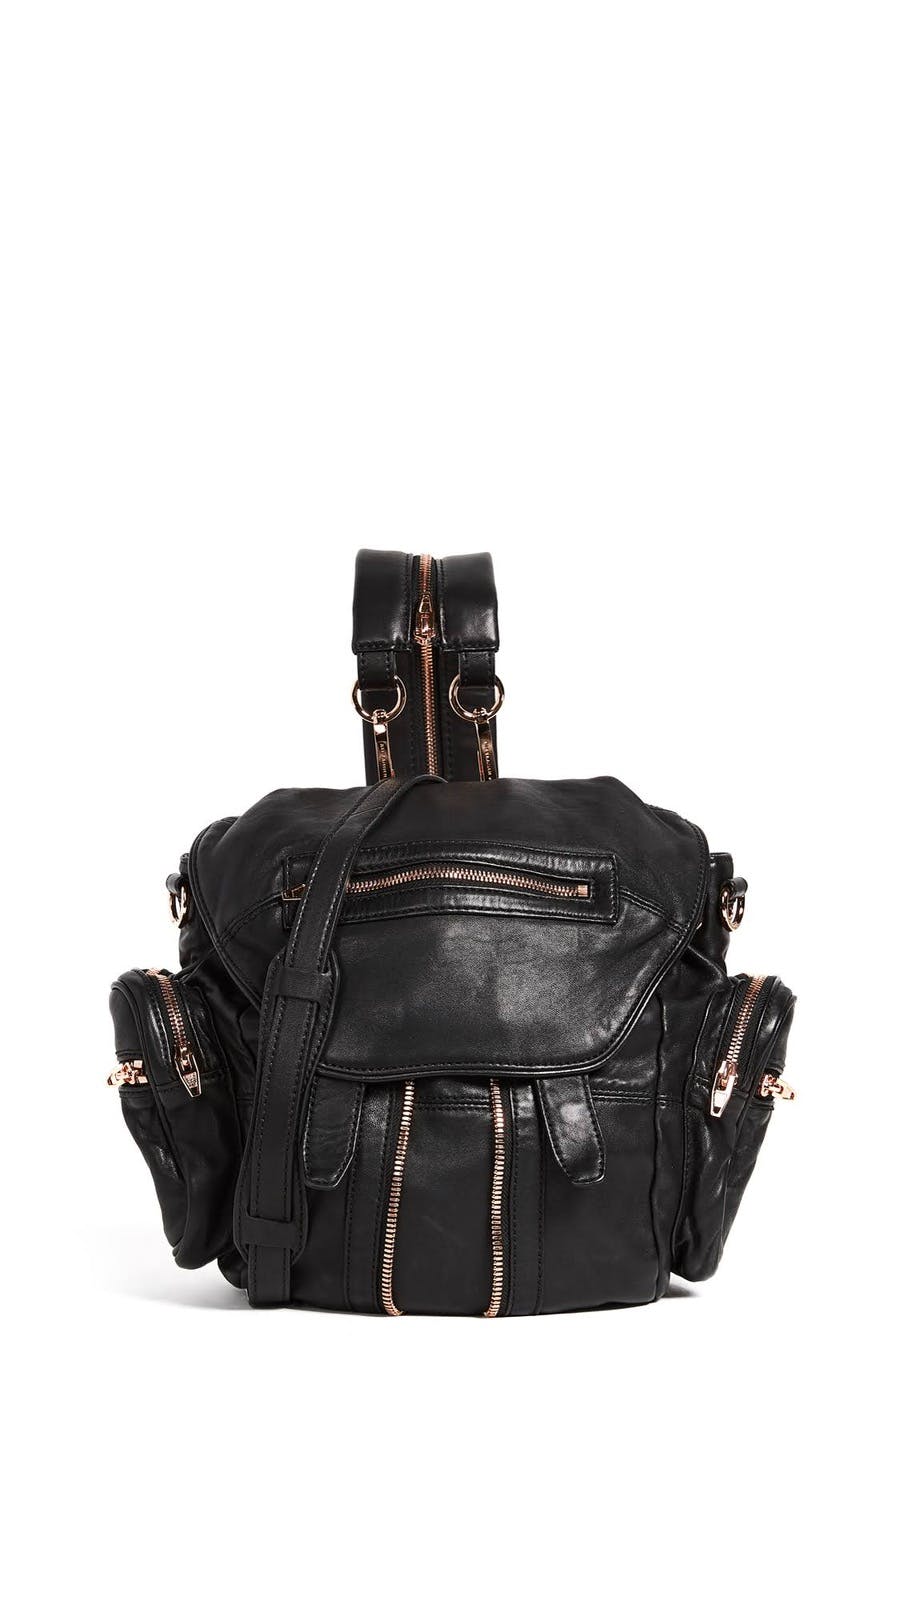 Authentic Alexander Wang Marti Leather Backpack - 8